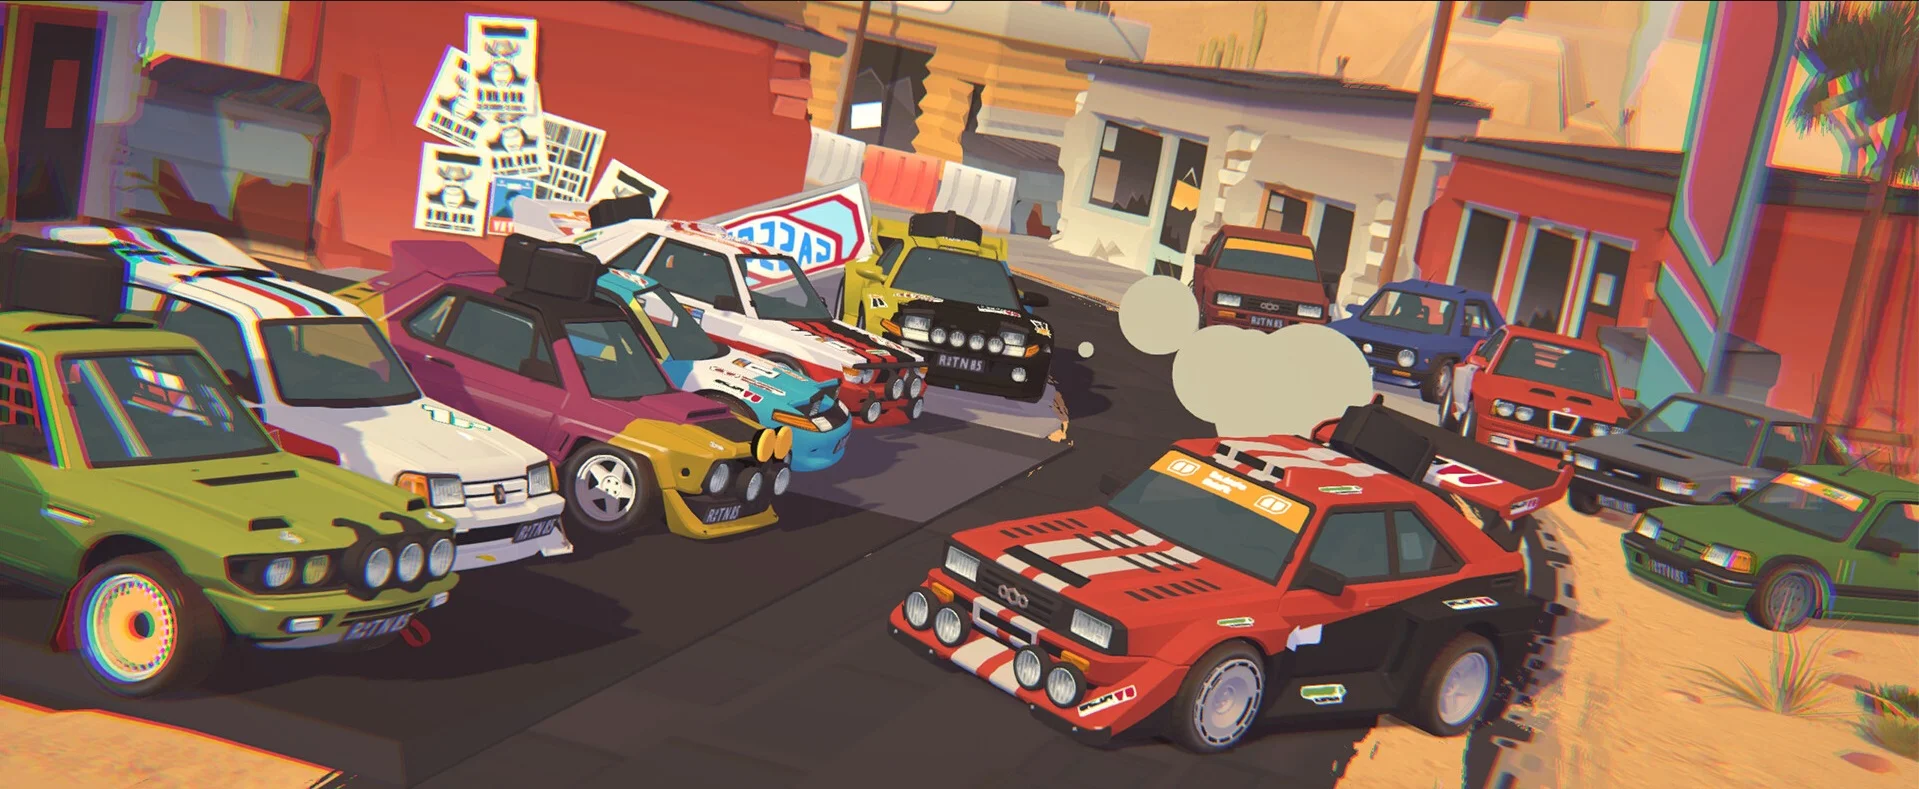 The announcement of #DRIVE Rally took place - a colorful racing arcade from the creators of the mobile #DRIVE